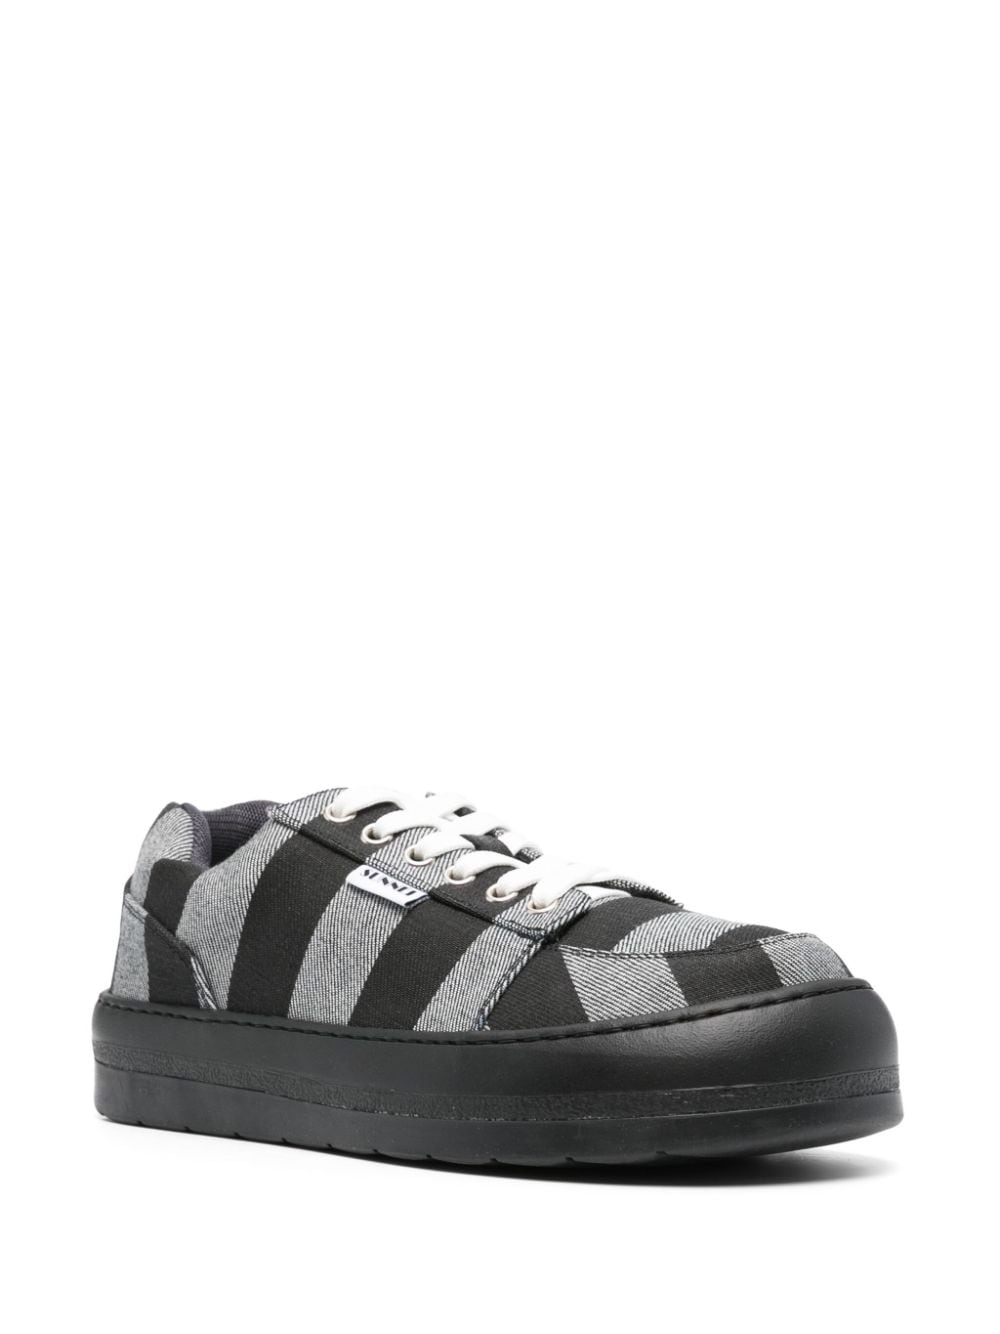 Dreamy Shoes striped sneakers - 2